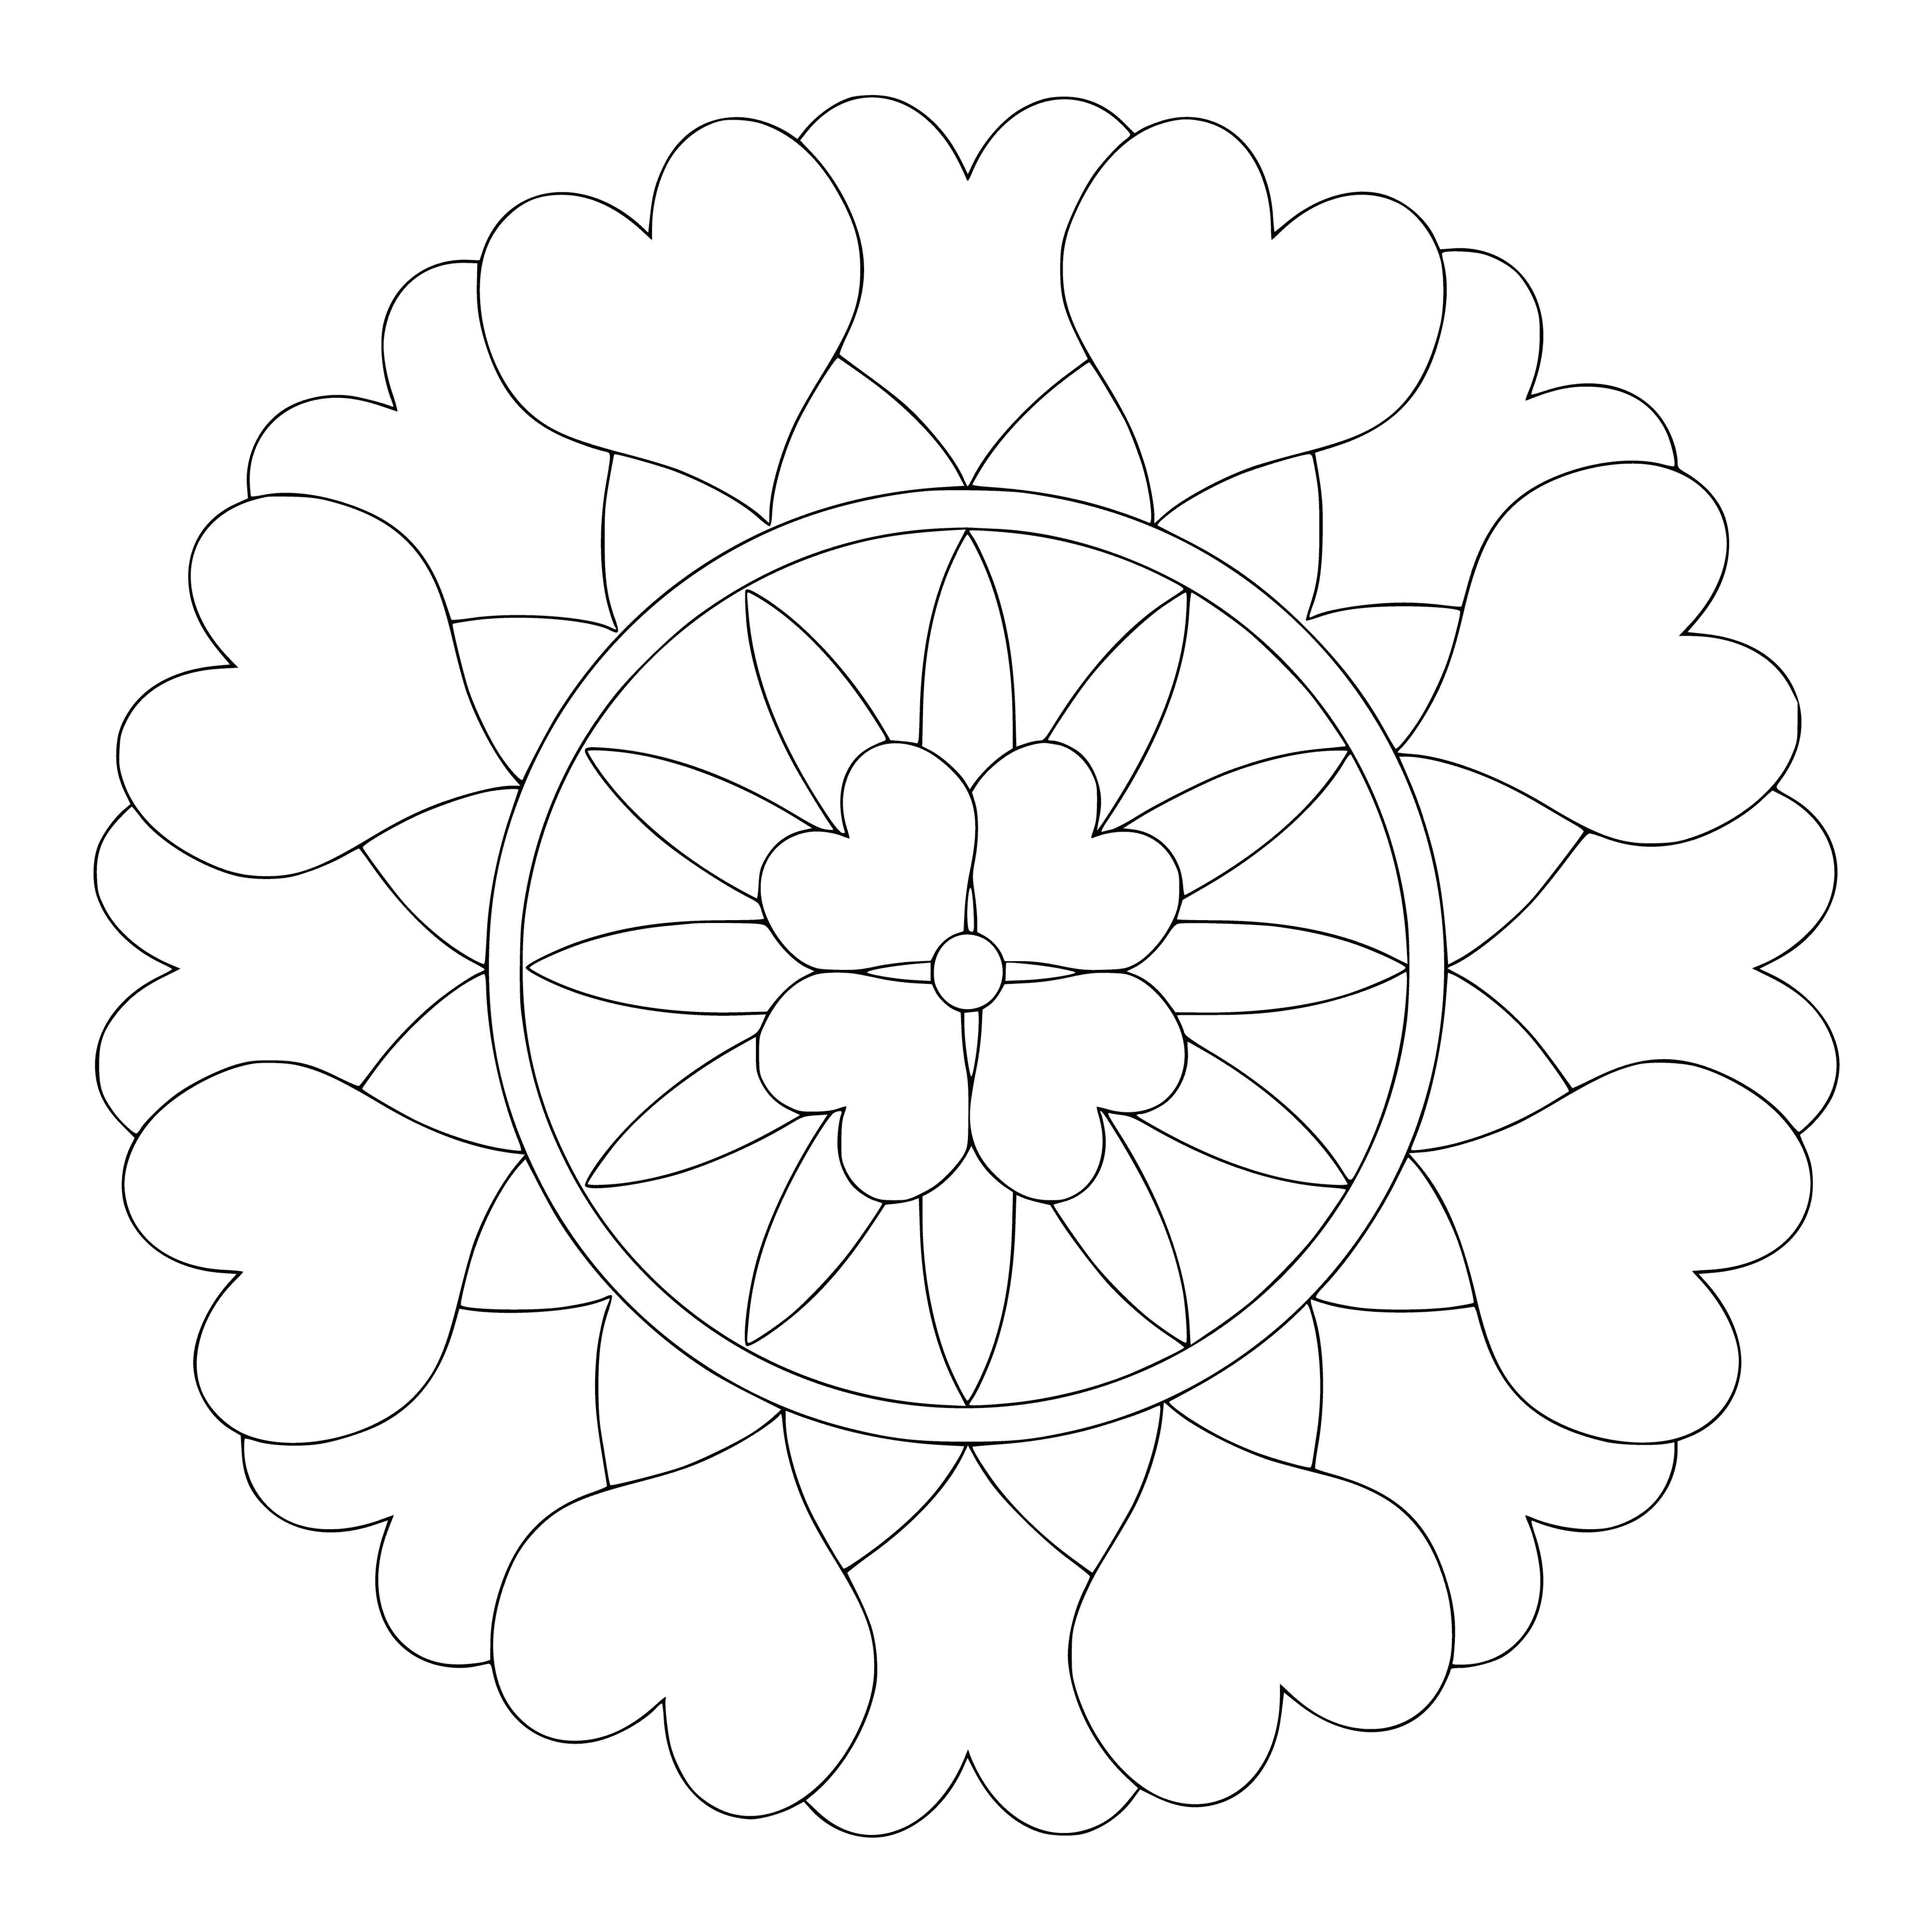 Creating mandalas, symbolizing the interconnection of life and the universe, is a meditation practice. ?‍♀️A large flower in the center of a mandala encircled by leaves, vines, and flowers in a square with curved corners. Meditation through mandala making builds understanding of the universe.